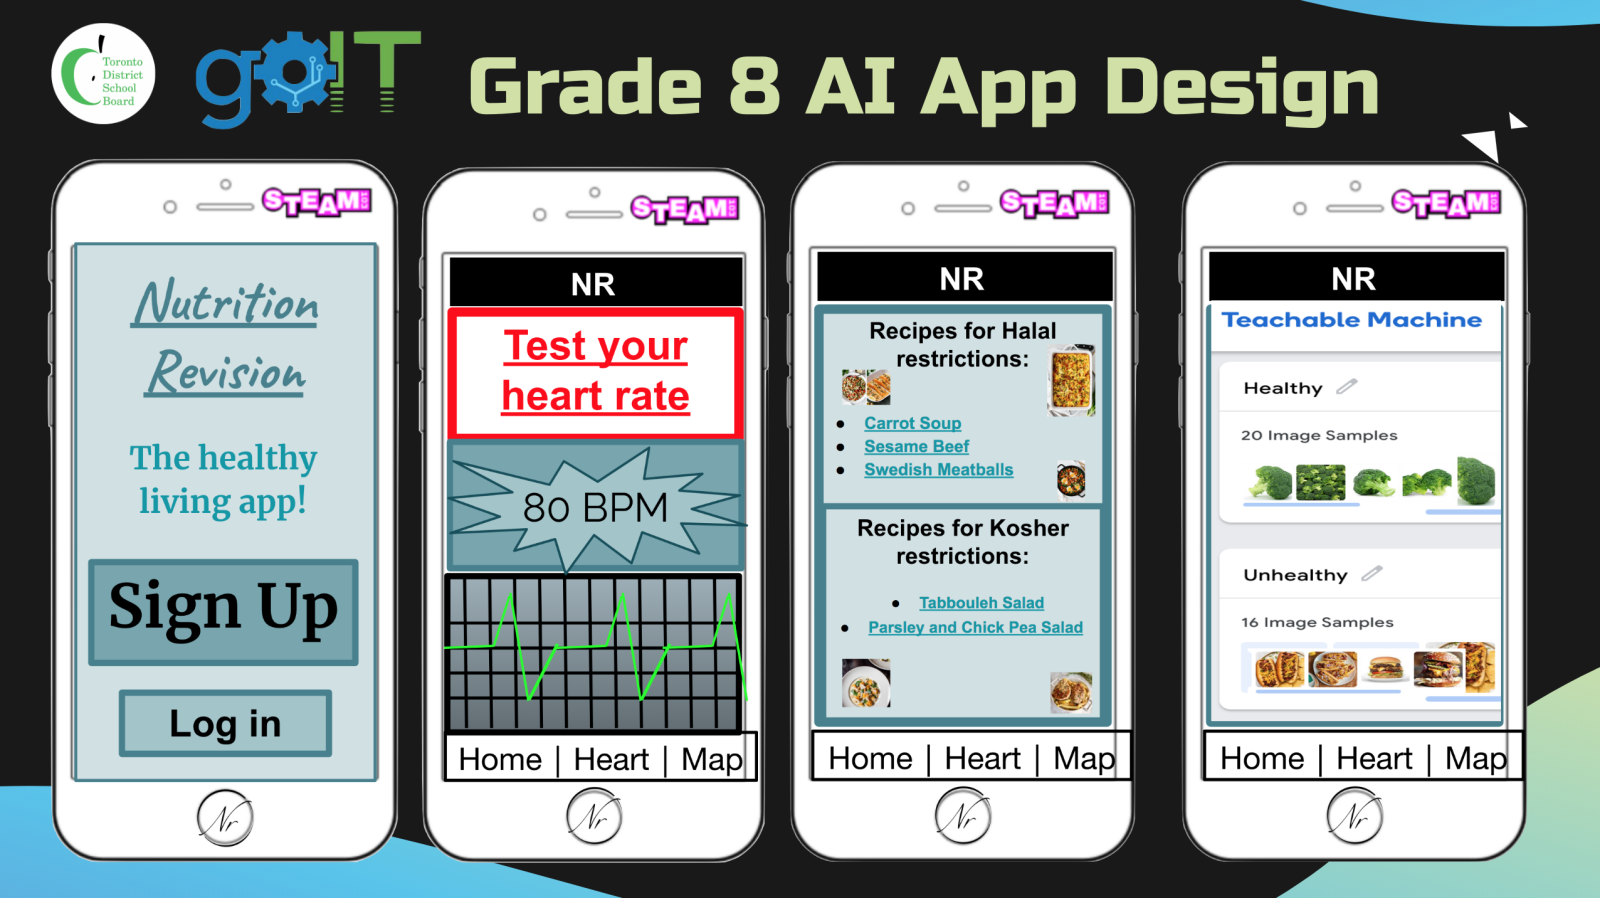 App Design from Cosburn MS students